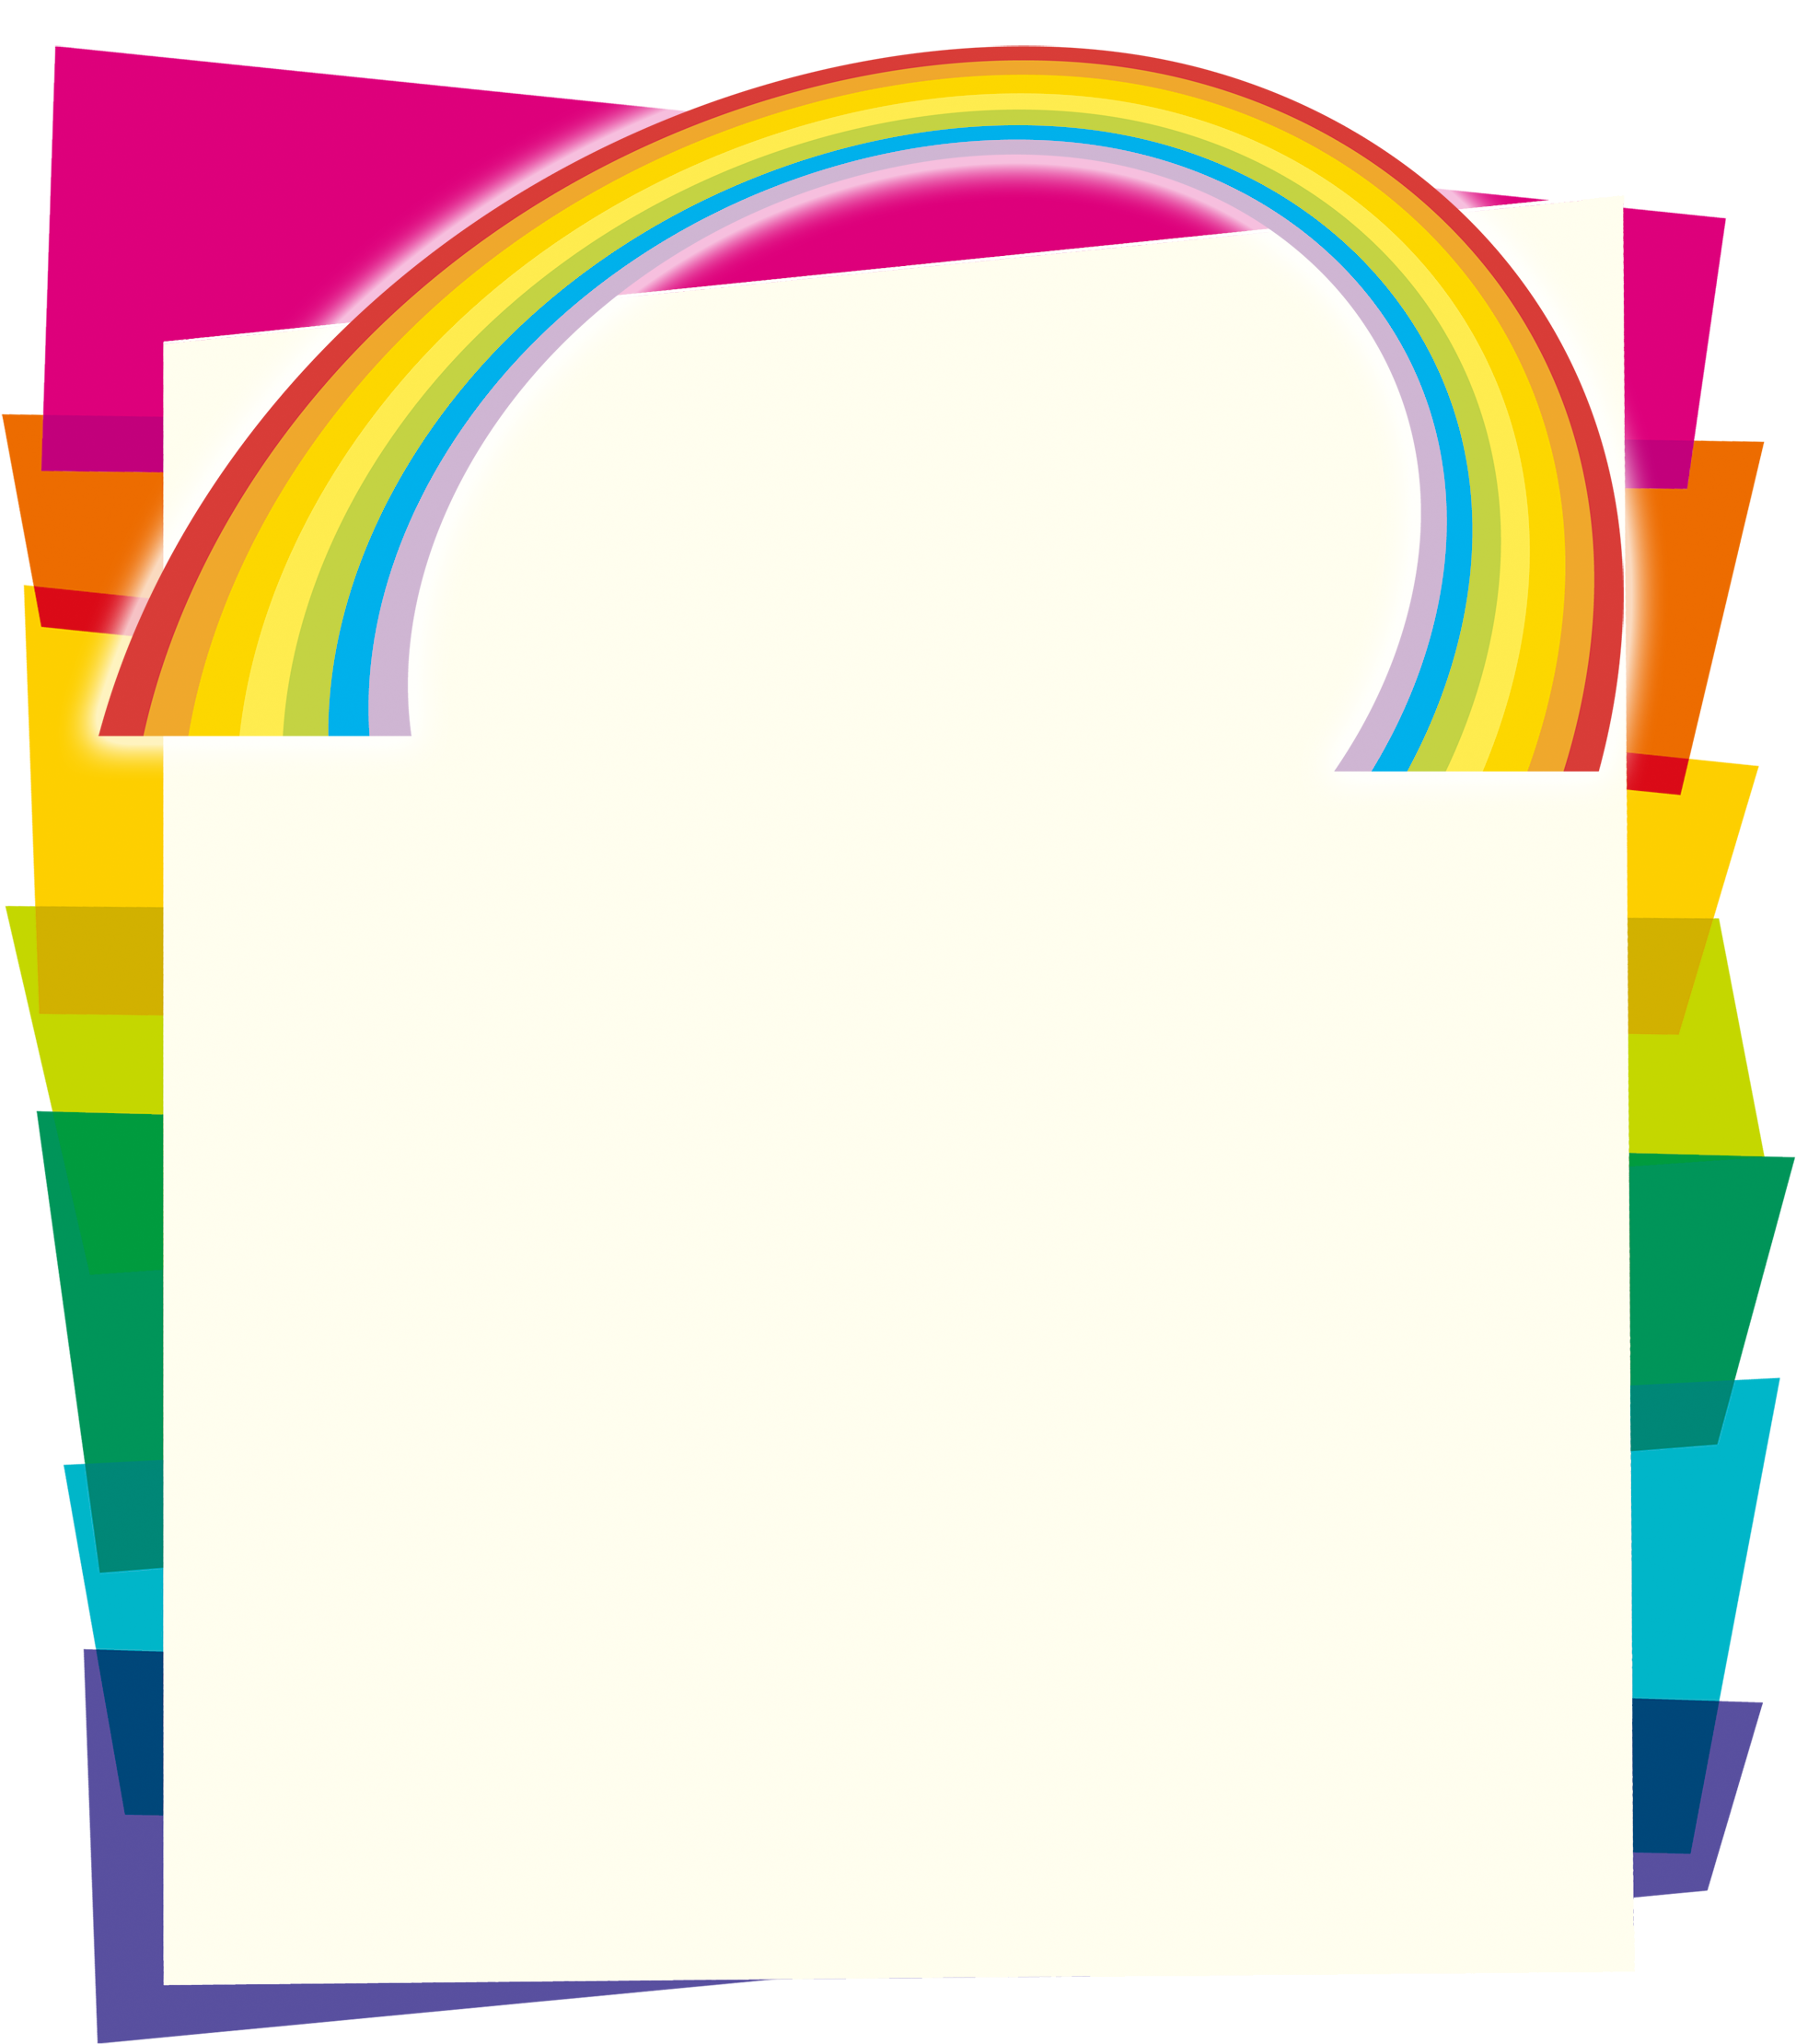 Download A Rainbow Over A White Square [100% Free] - FastPNG